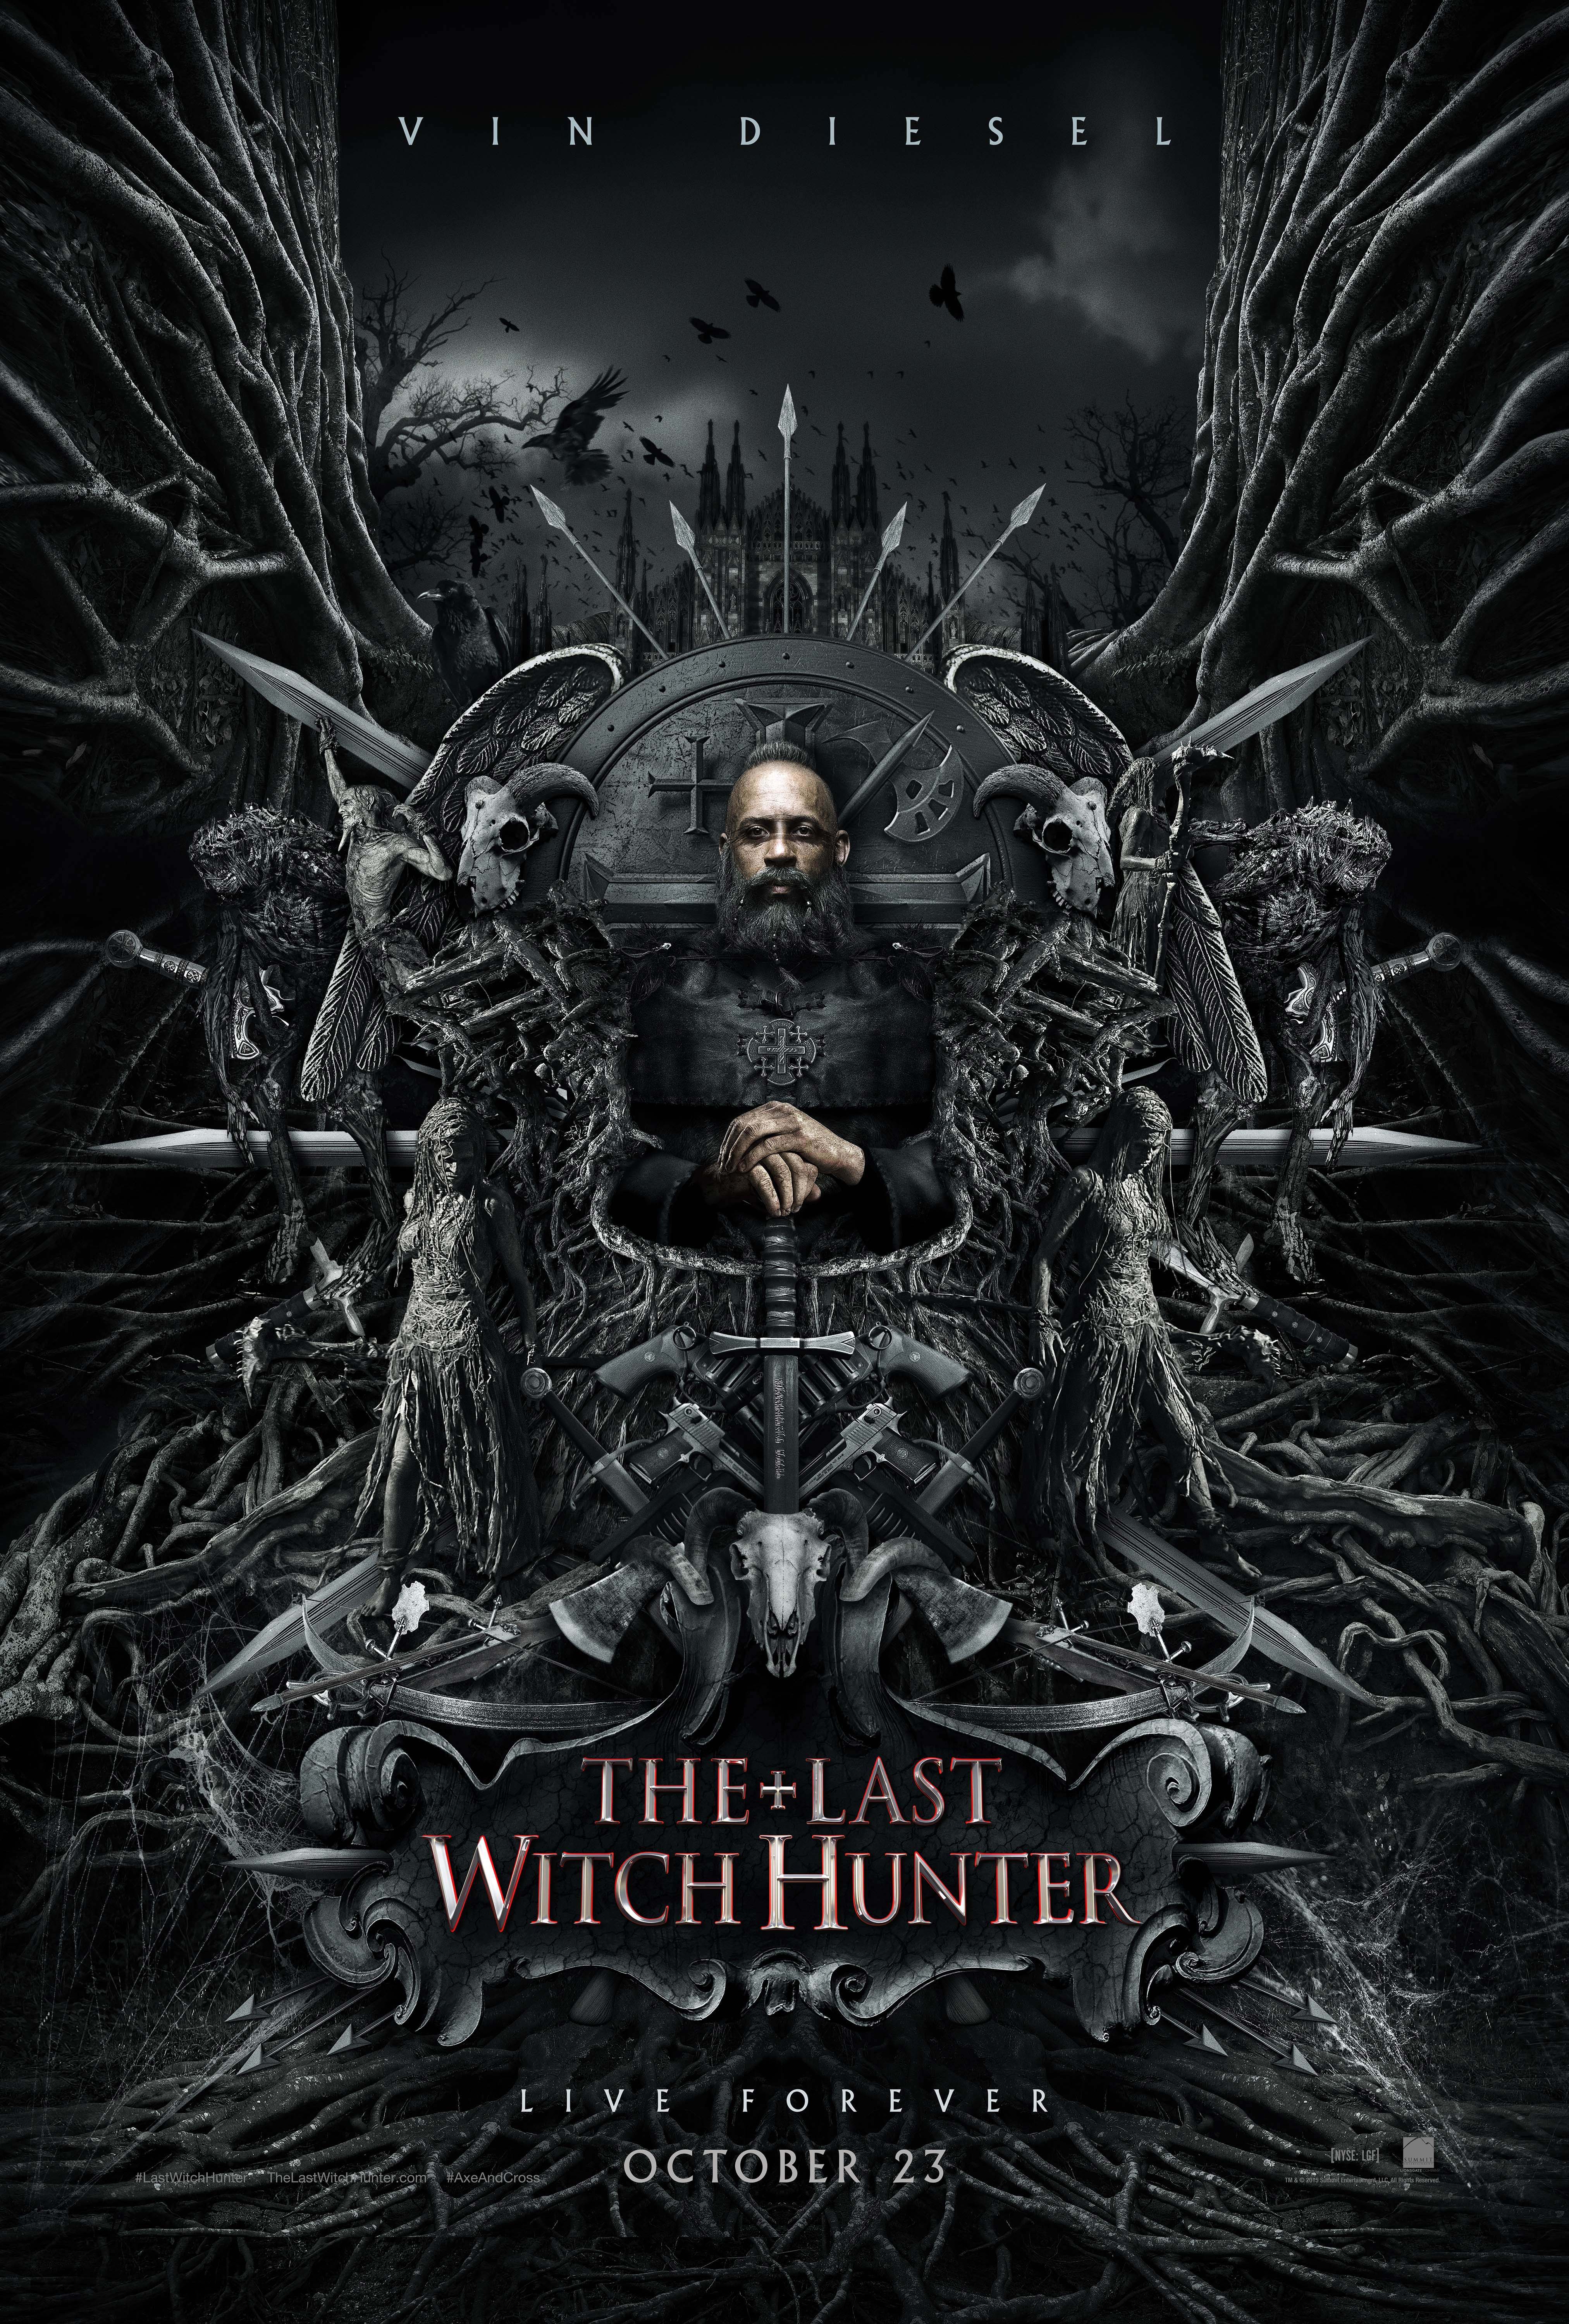 the movie the last witch hunter